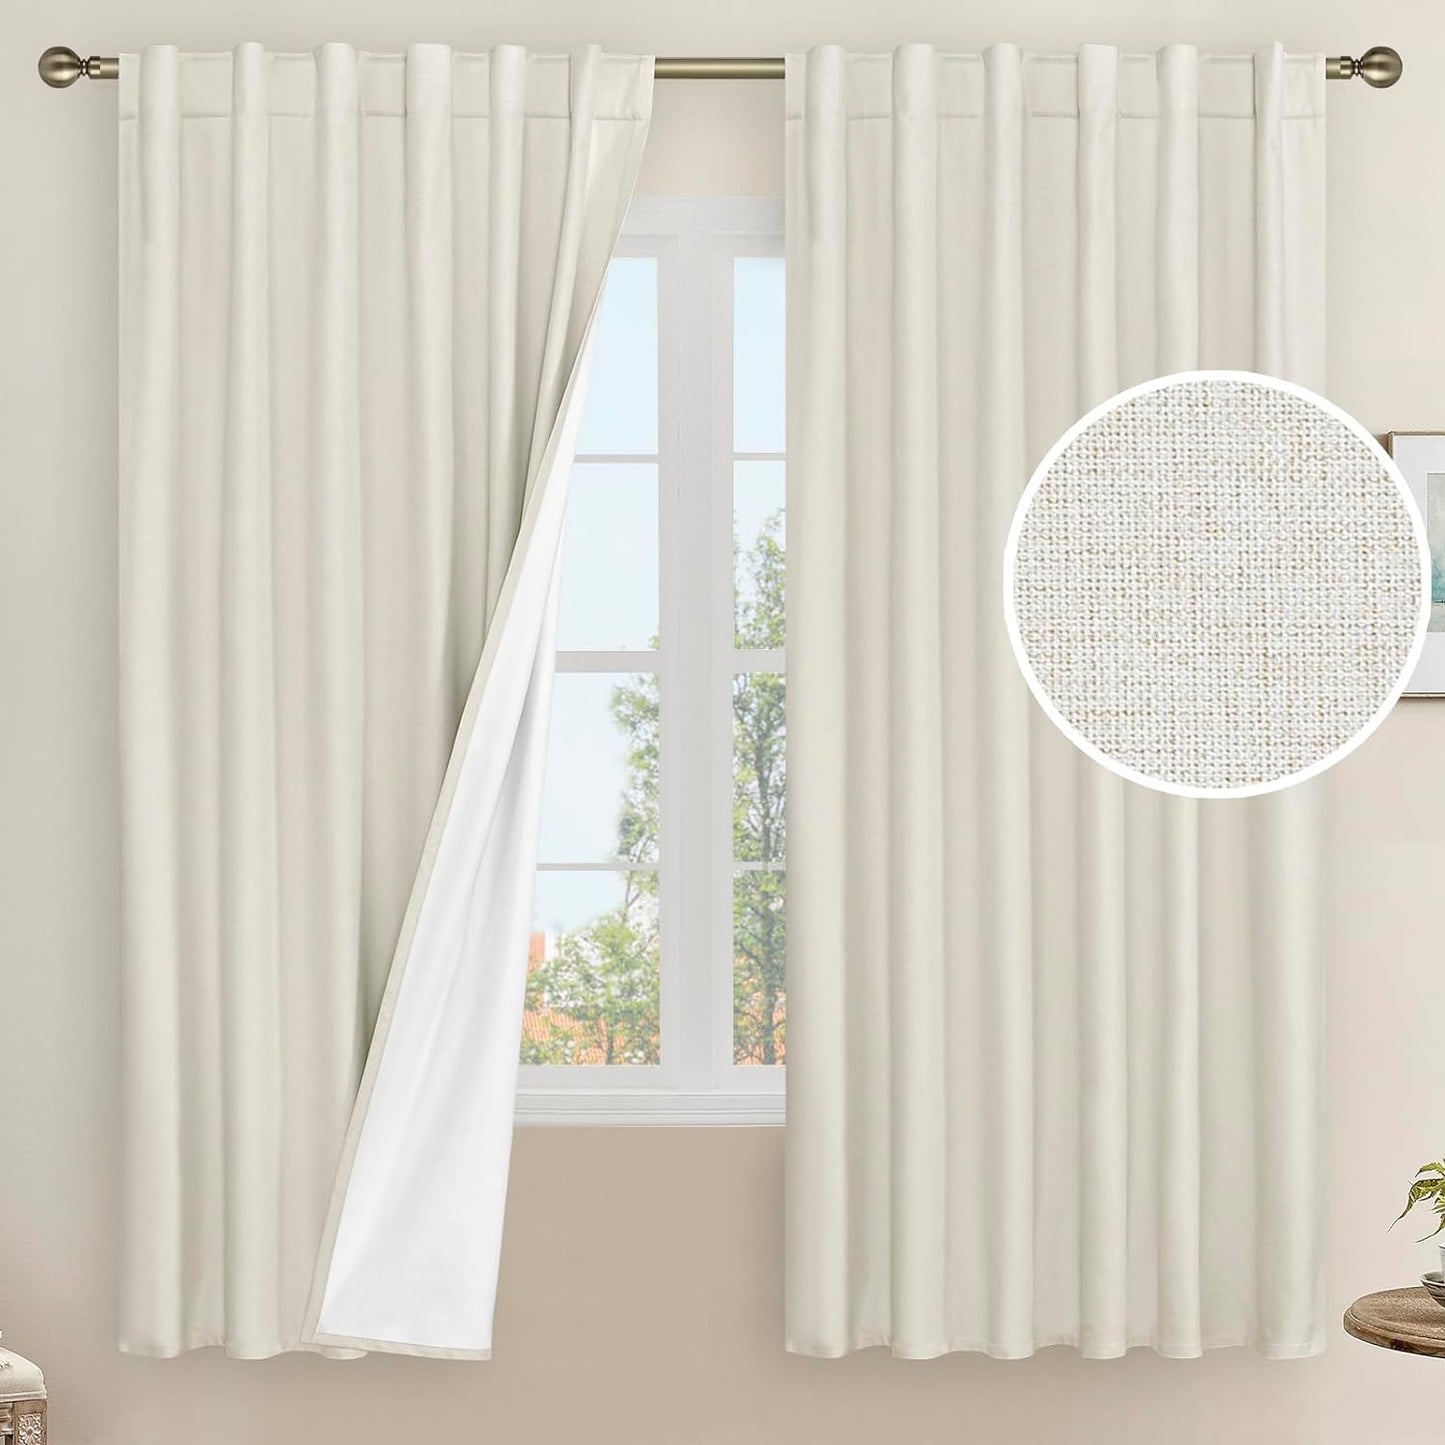 LAMIT Linen Full Blackout Window Curtains for Bedroom, 54 Inches Thermal Farmhouse Curtains Back Tab and Rod Pocket Privacy Protected Burlap Panels with White Liner, 2 Panels, 52 X 54 Inch, White  LAMIT Ivory 52W X 63L 